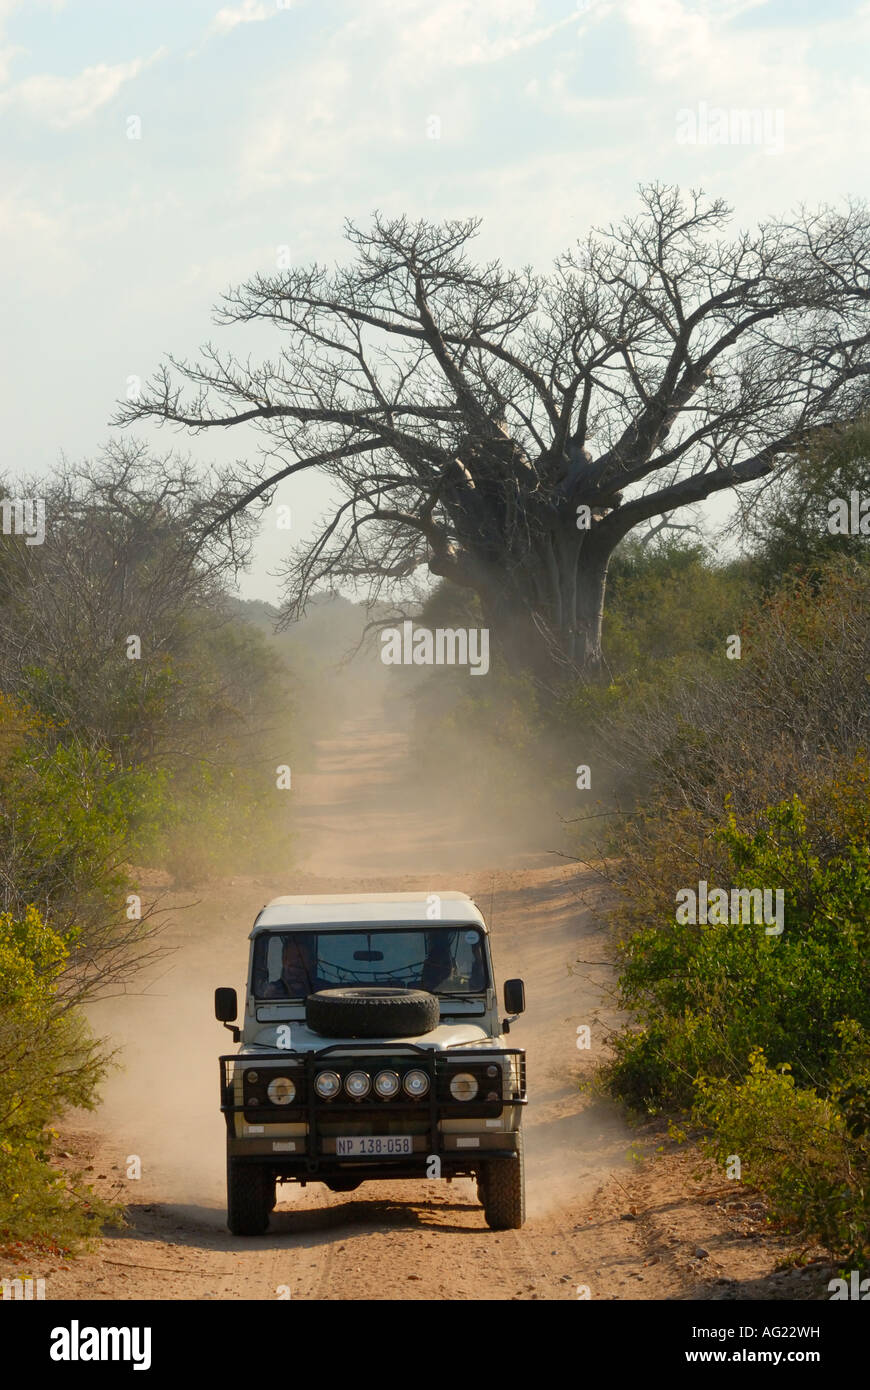 4x4 vehicle travelling on a rural dirt road in Mozambique Stock Photo